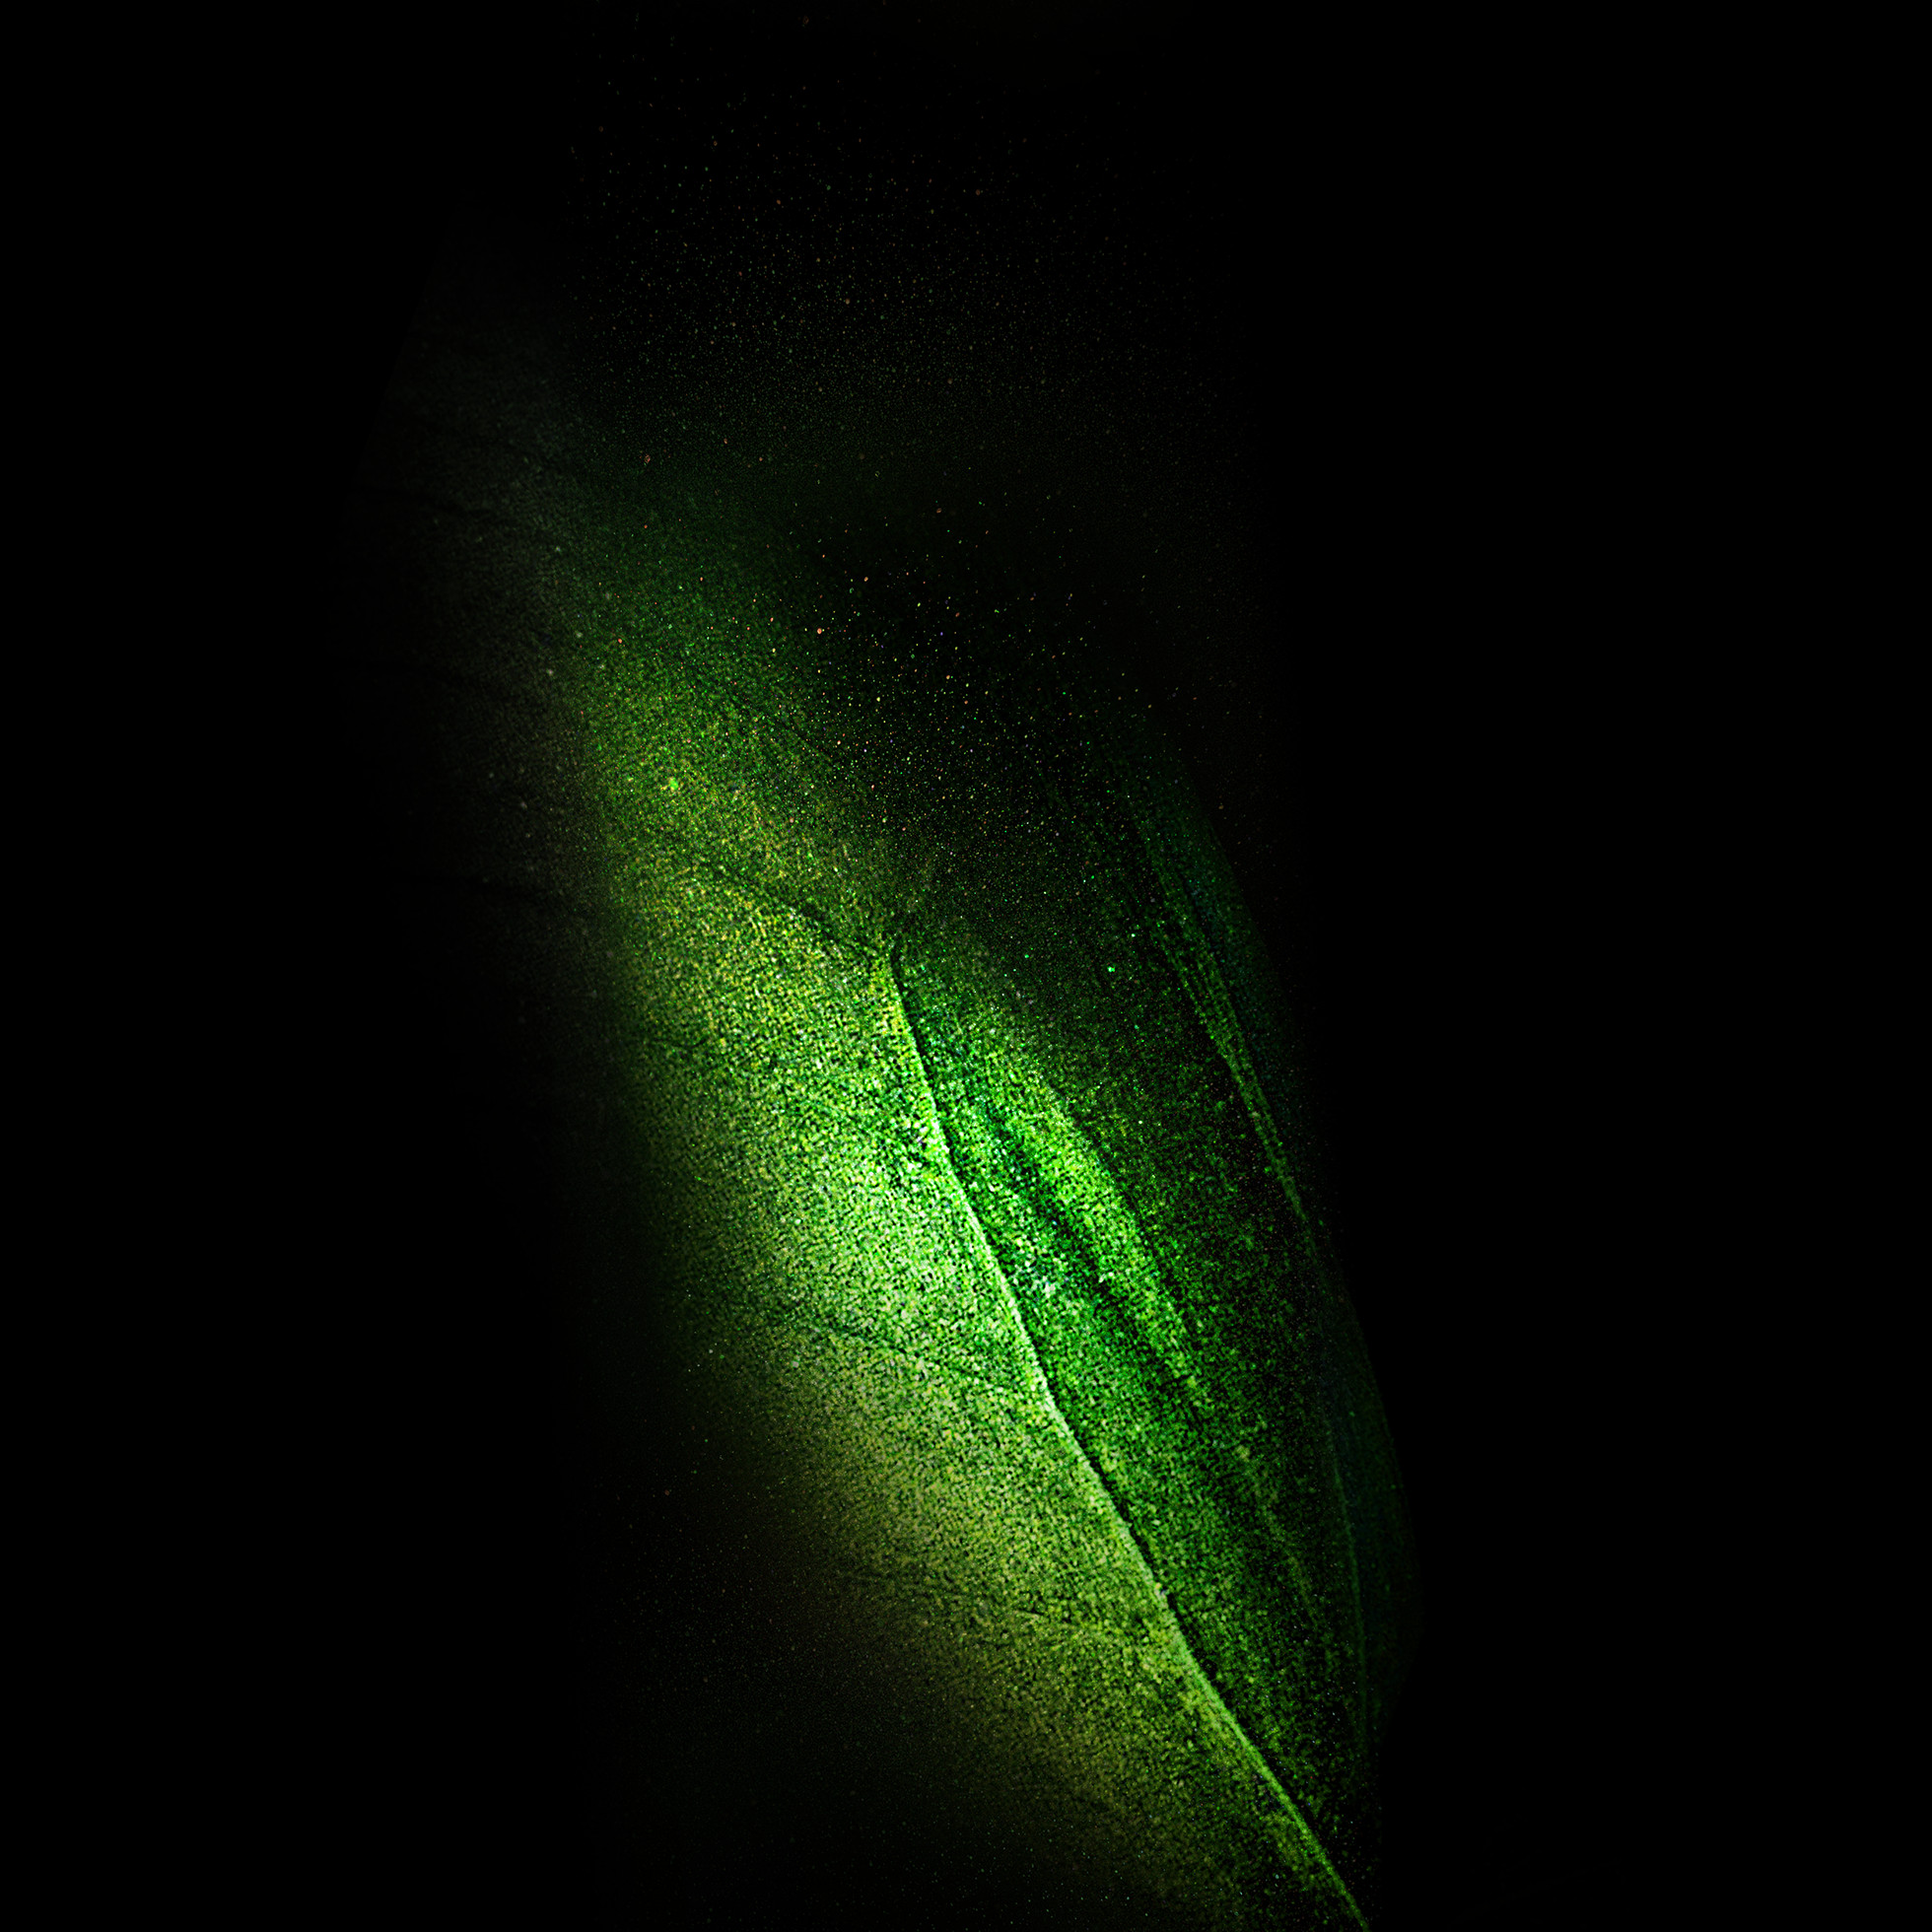 Samsung Galaxy Fold butterfly wallpaper in green with one wing.